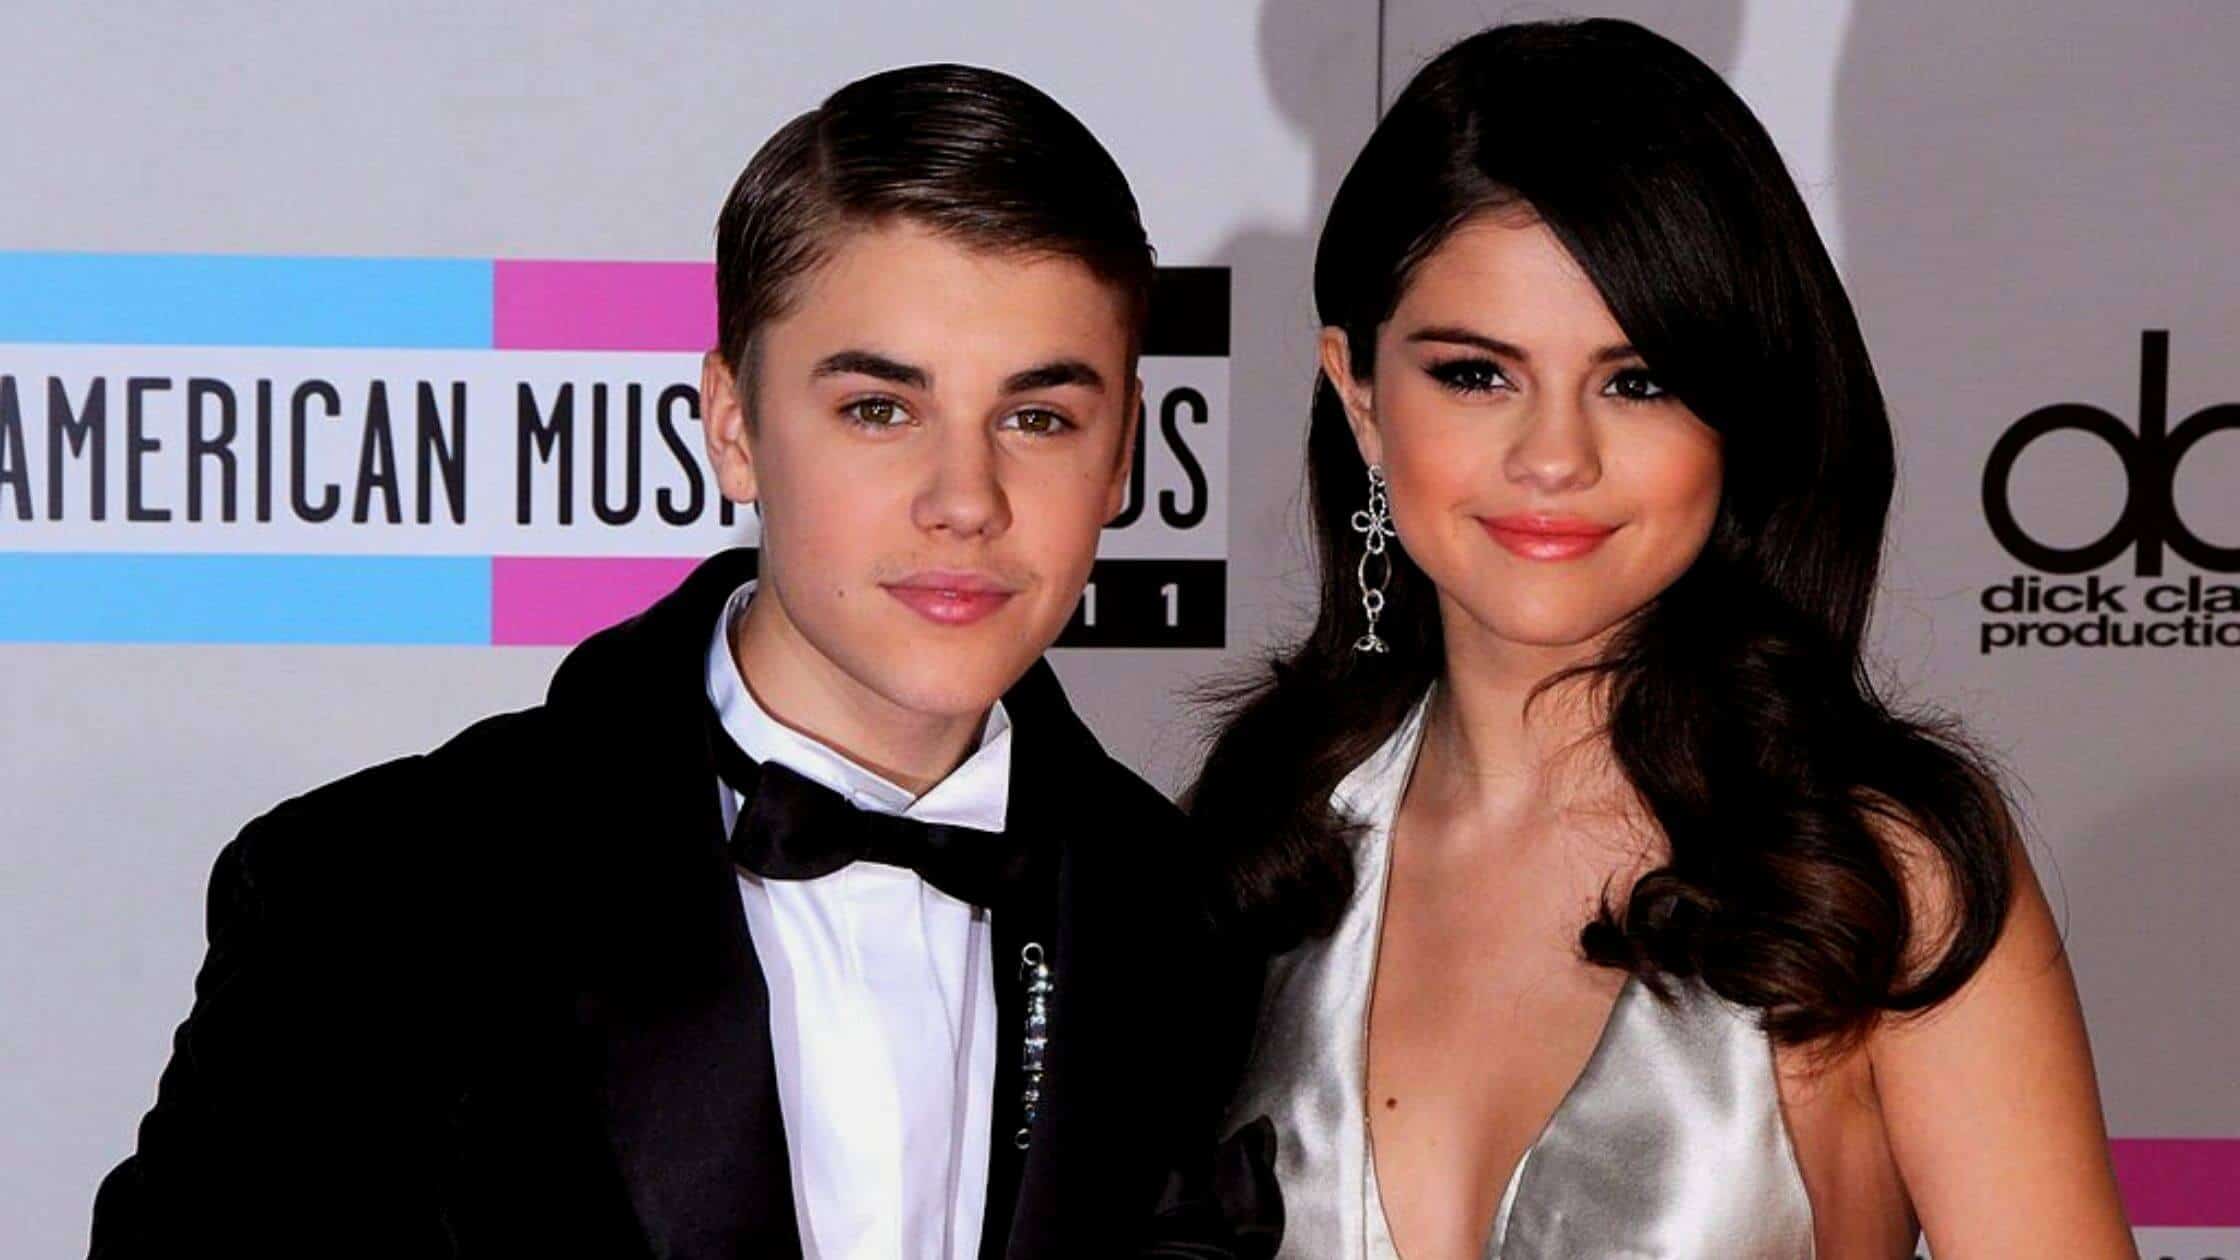 TikTok Claimed Selena Gomez Was Always Skinny When She Dated Justin Bieber What Is Her Response